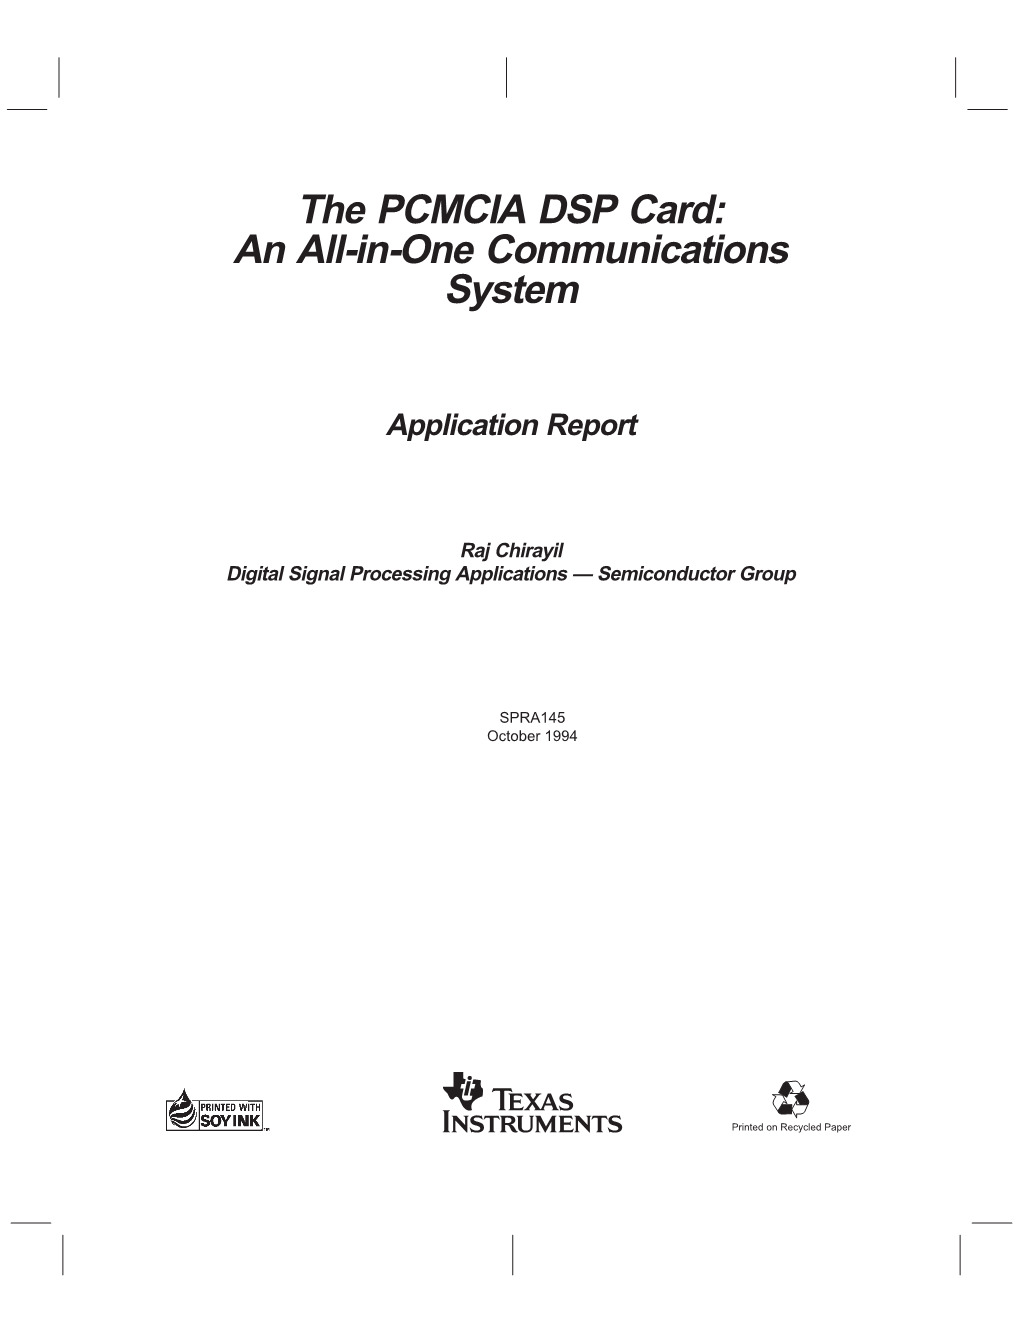 The PCMCIA DSP Card: an All-In-One Communications System